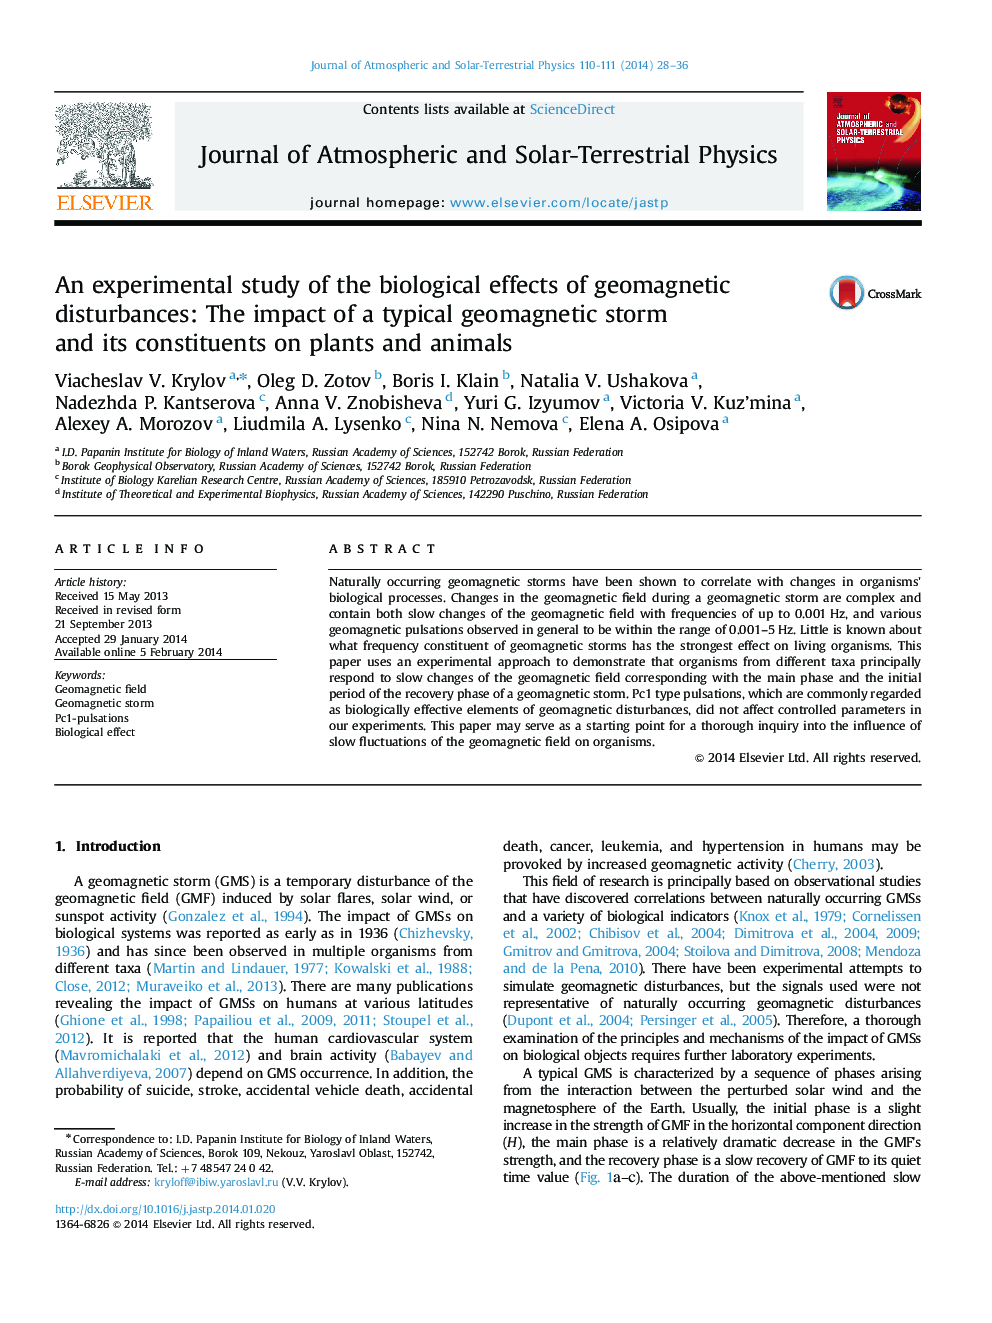 An experimental study of the biological effects of geomagnetic disturbances: The impact of a typical geomagnetic storm and its constituents on plants and animals